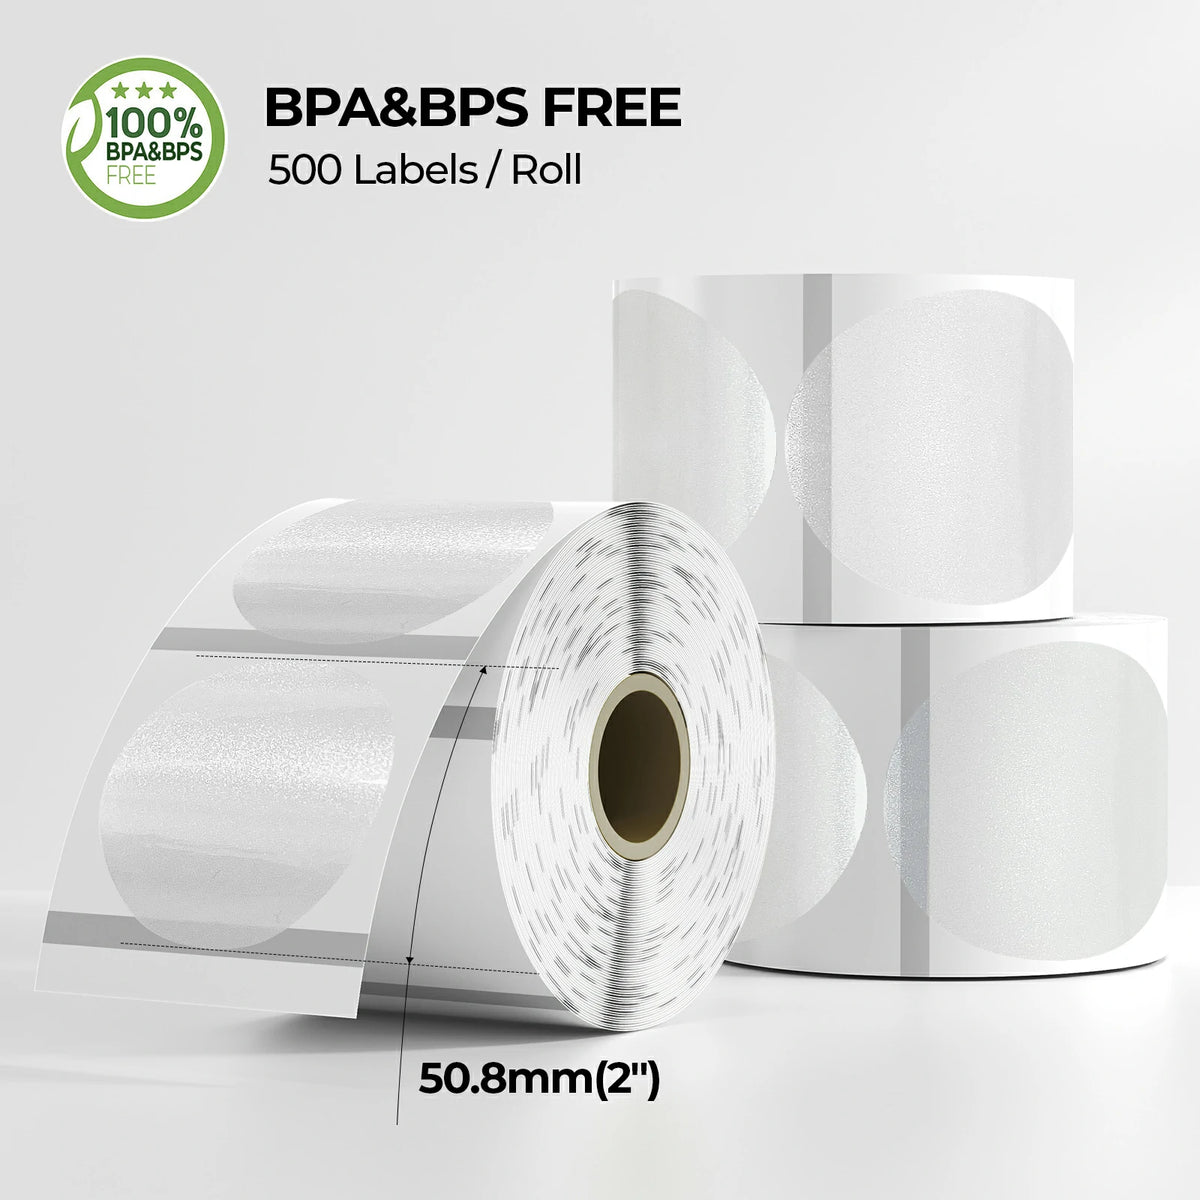 Each roll comes packed with 500 self-adhesive labels.